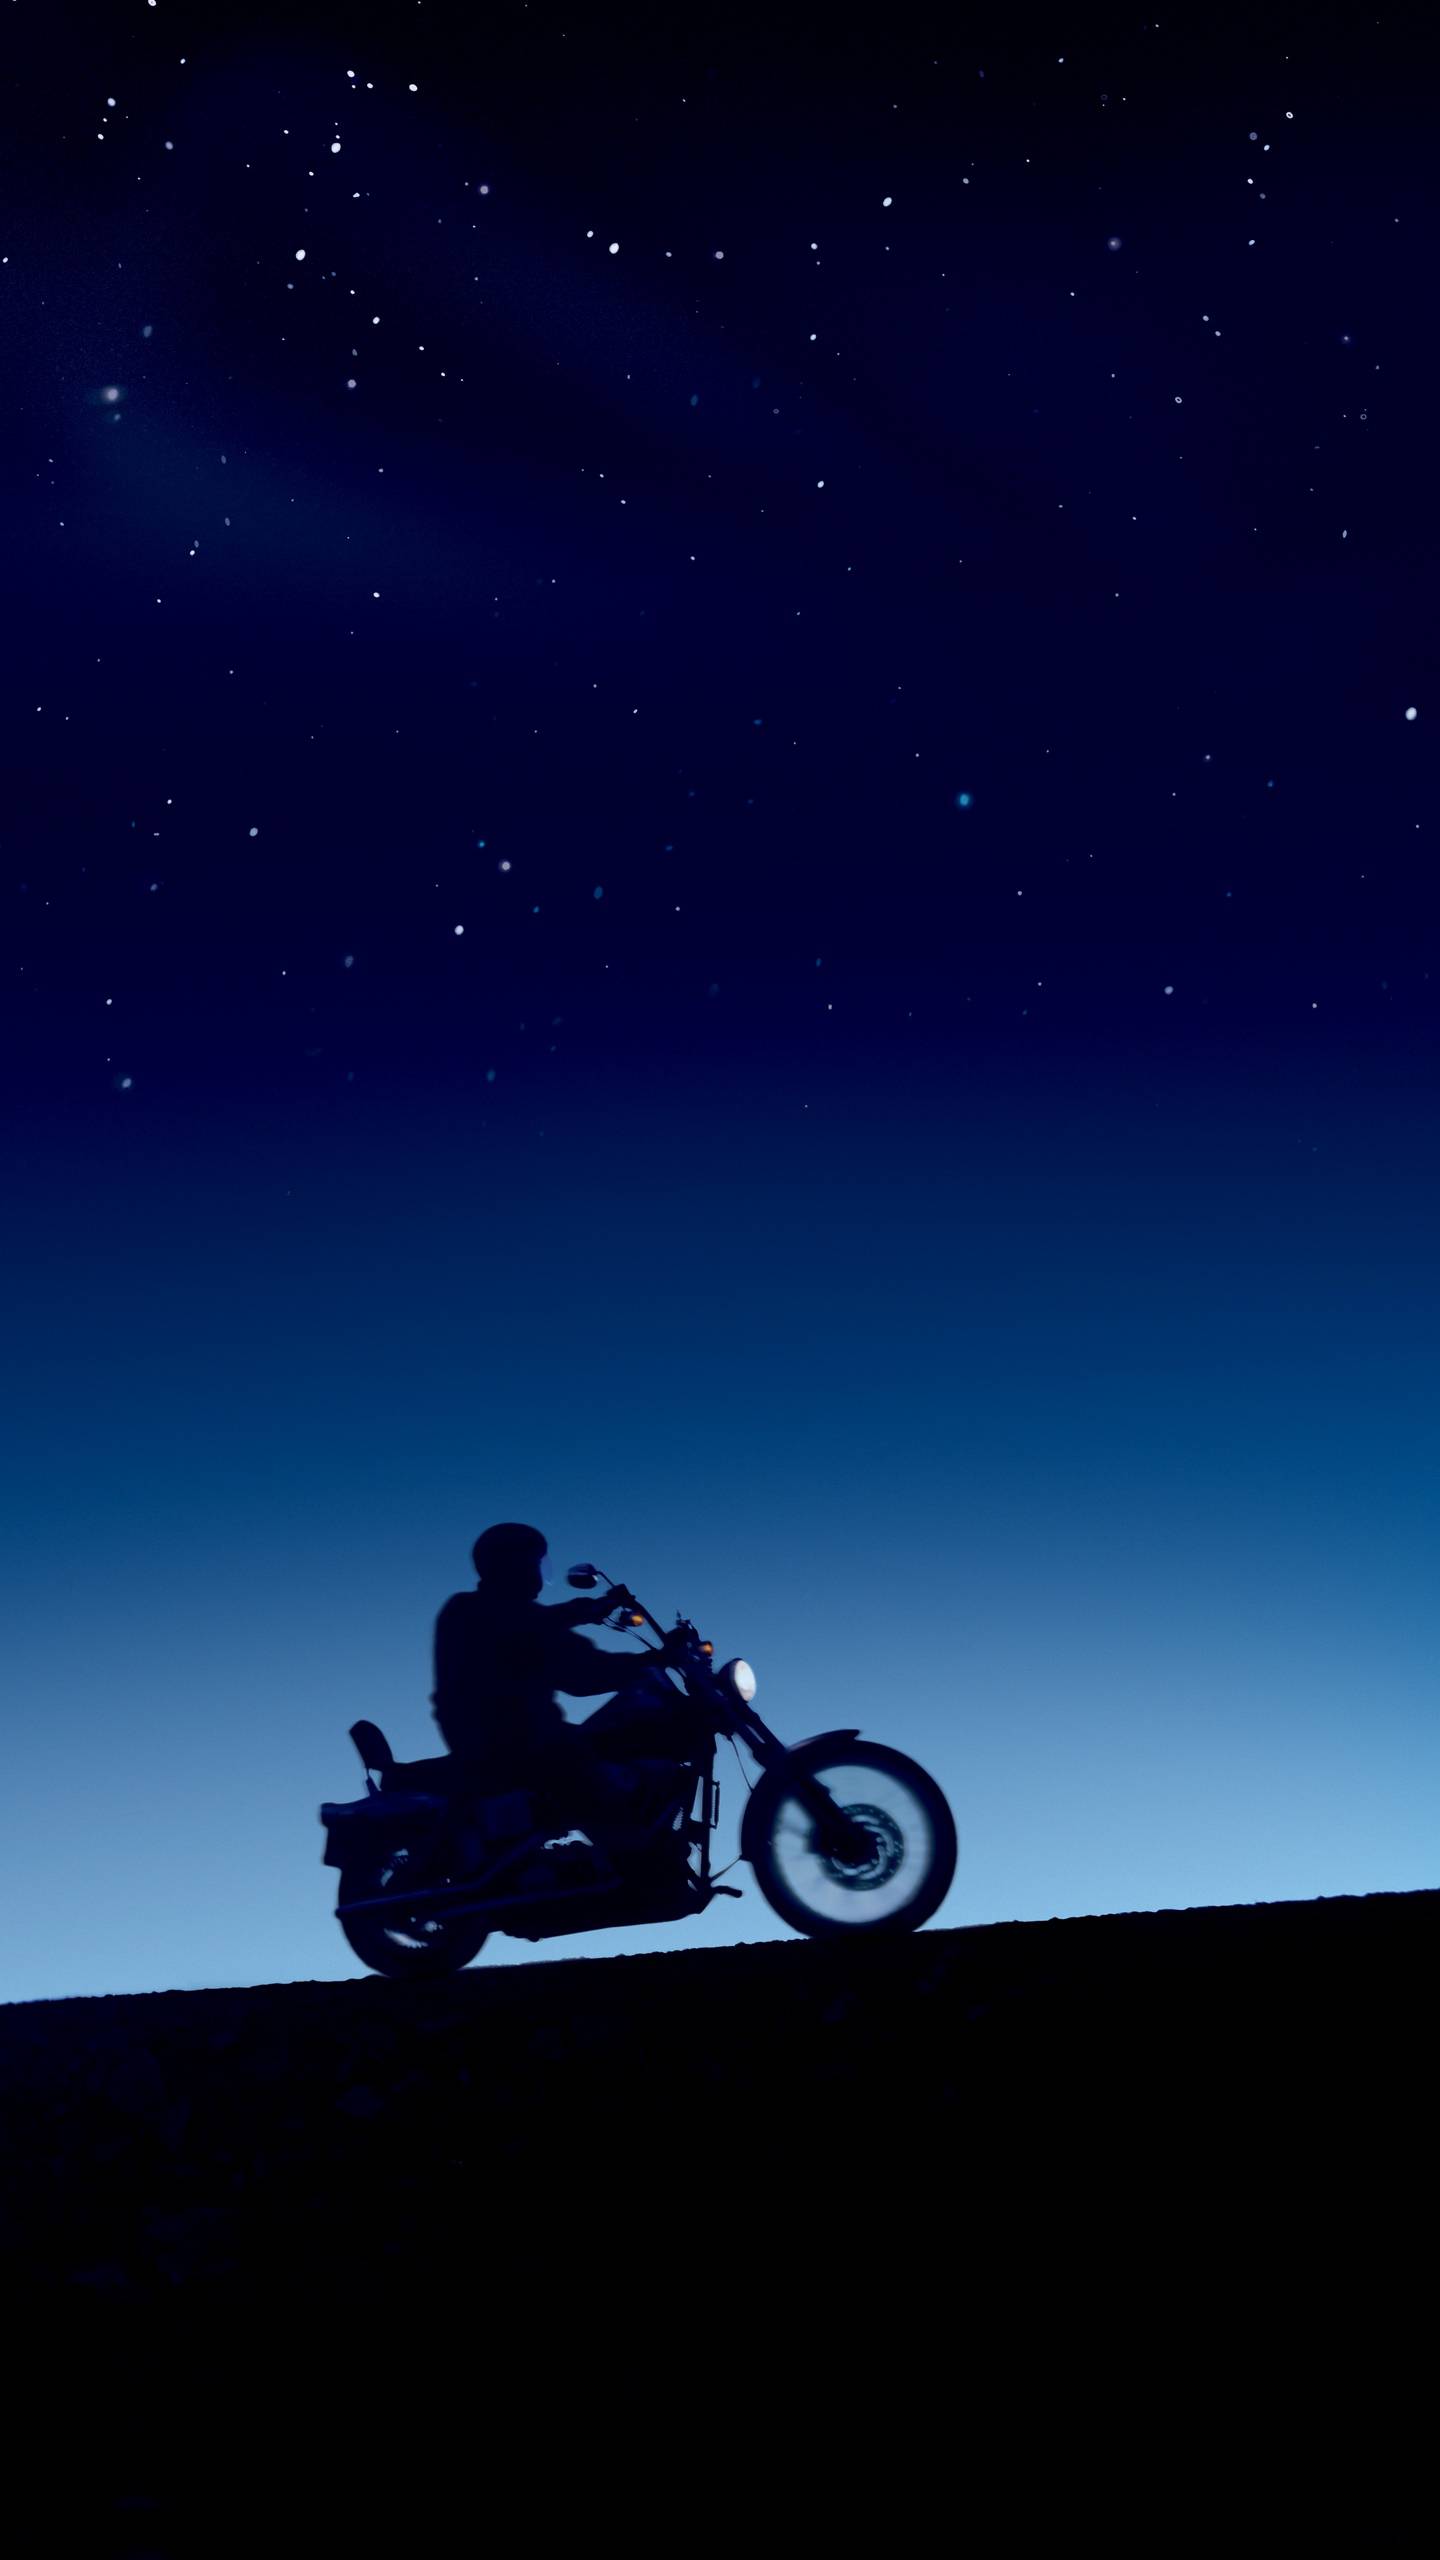 Silhouette Motorcycle IPhone Wallpaper - IPhone Wallpapers : iPhone  Wallpapers